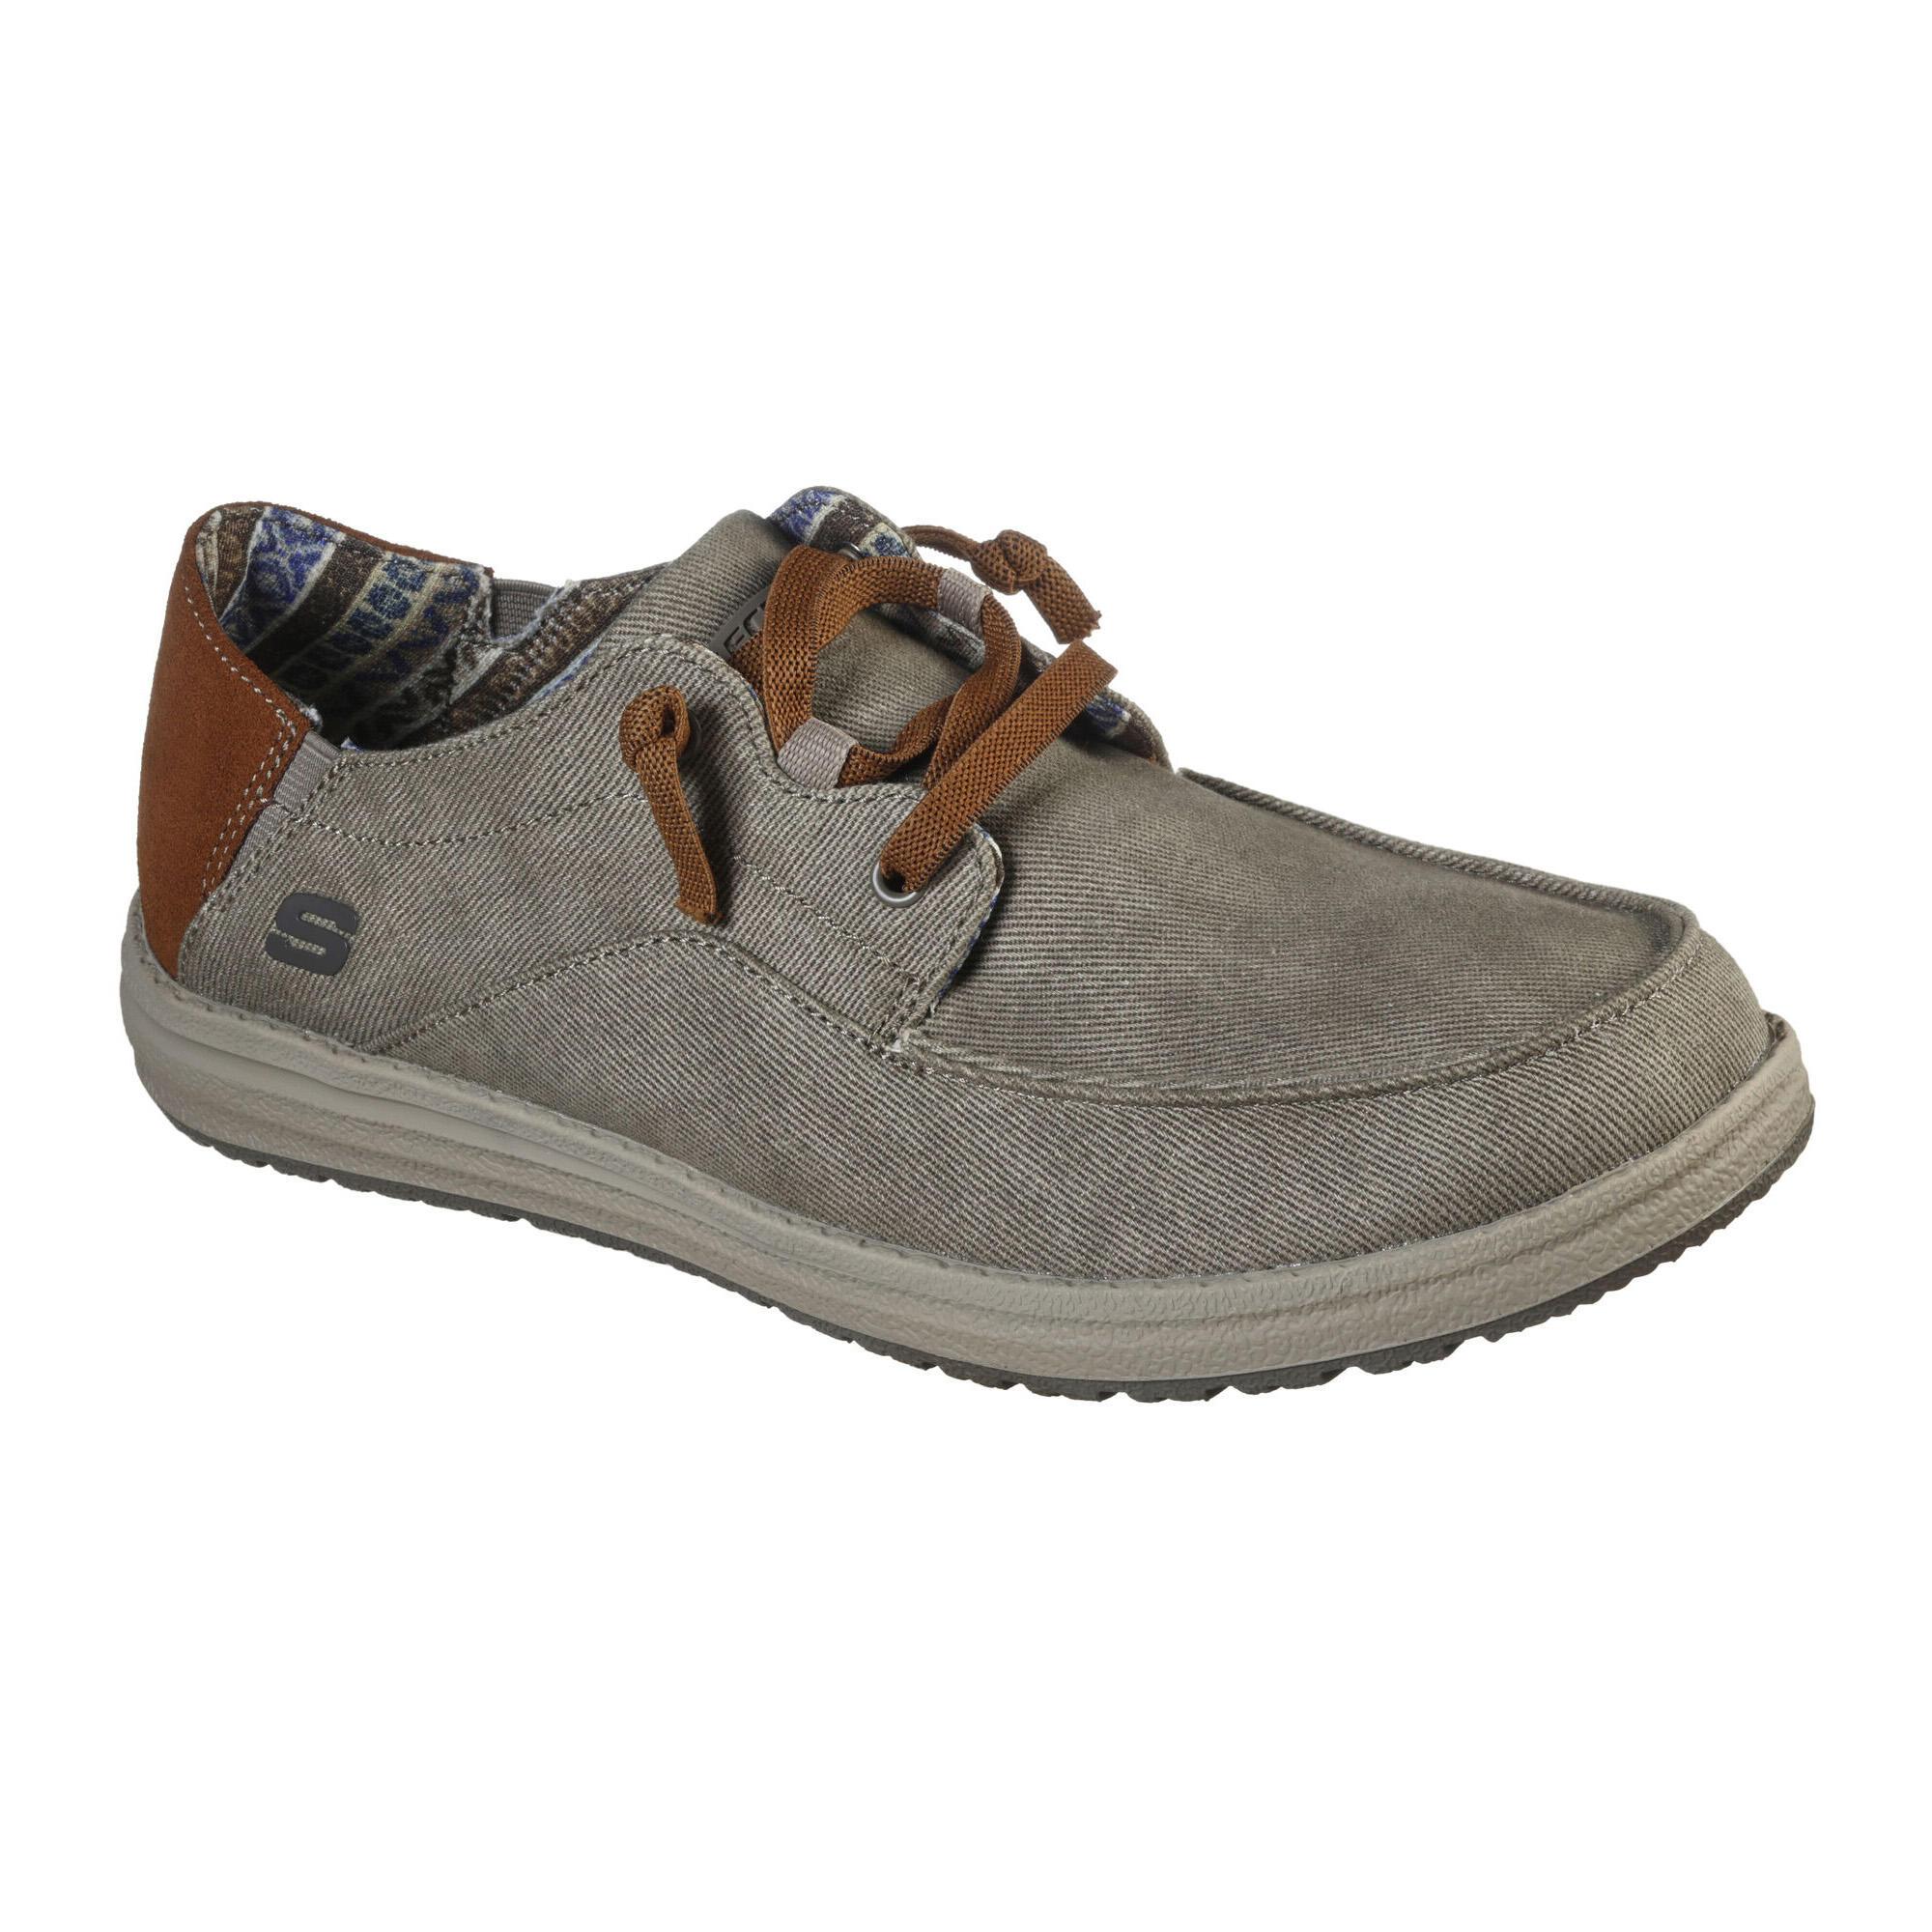 SKECHERS Mens Melson Planon Suede Casual Shoes (Taupe)